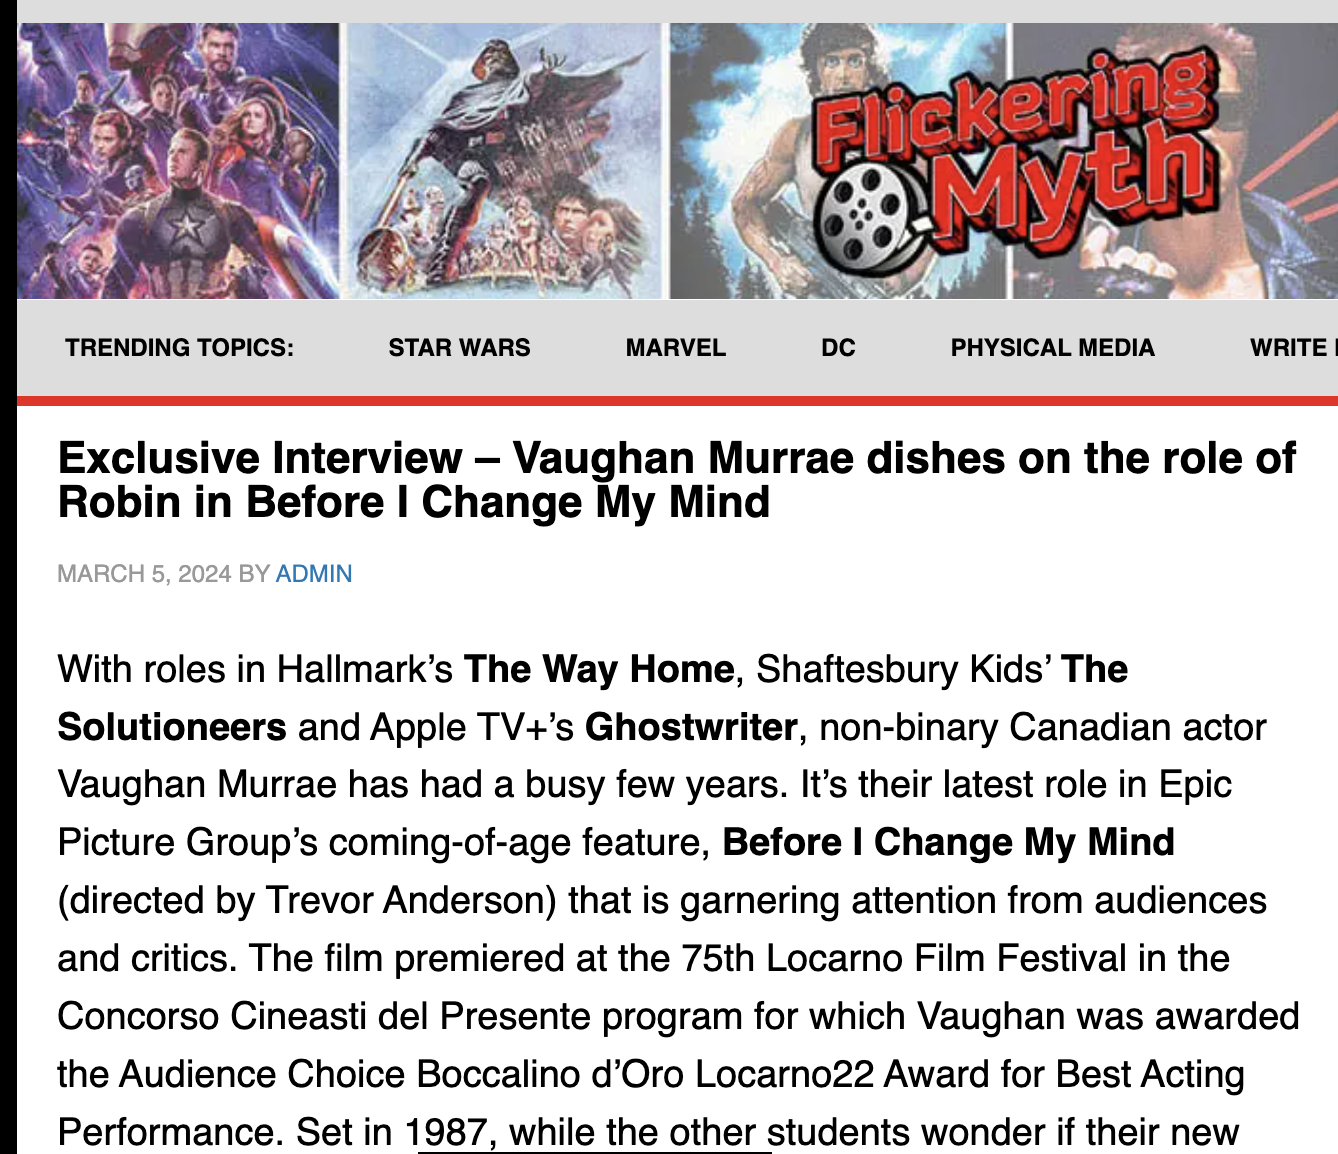 Exclusive Interview – Vaughan Murrae dishes on the role of Robin in Before I Change My Mind